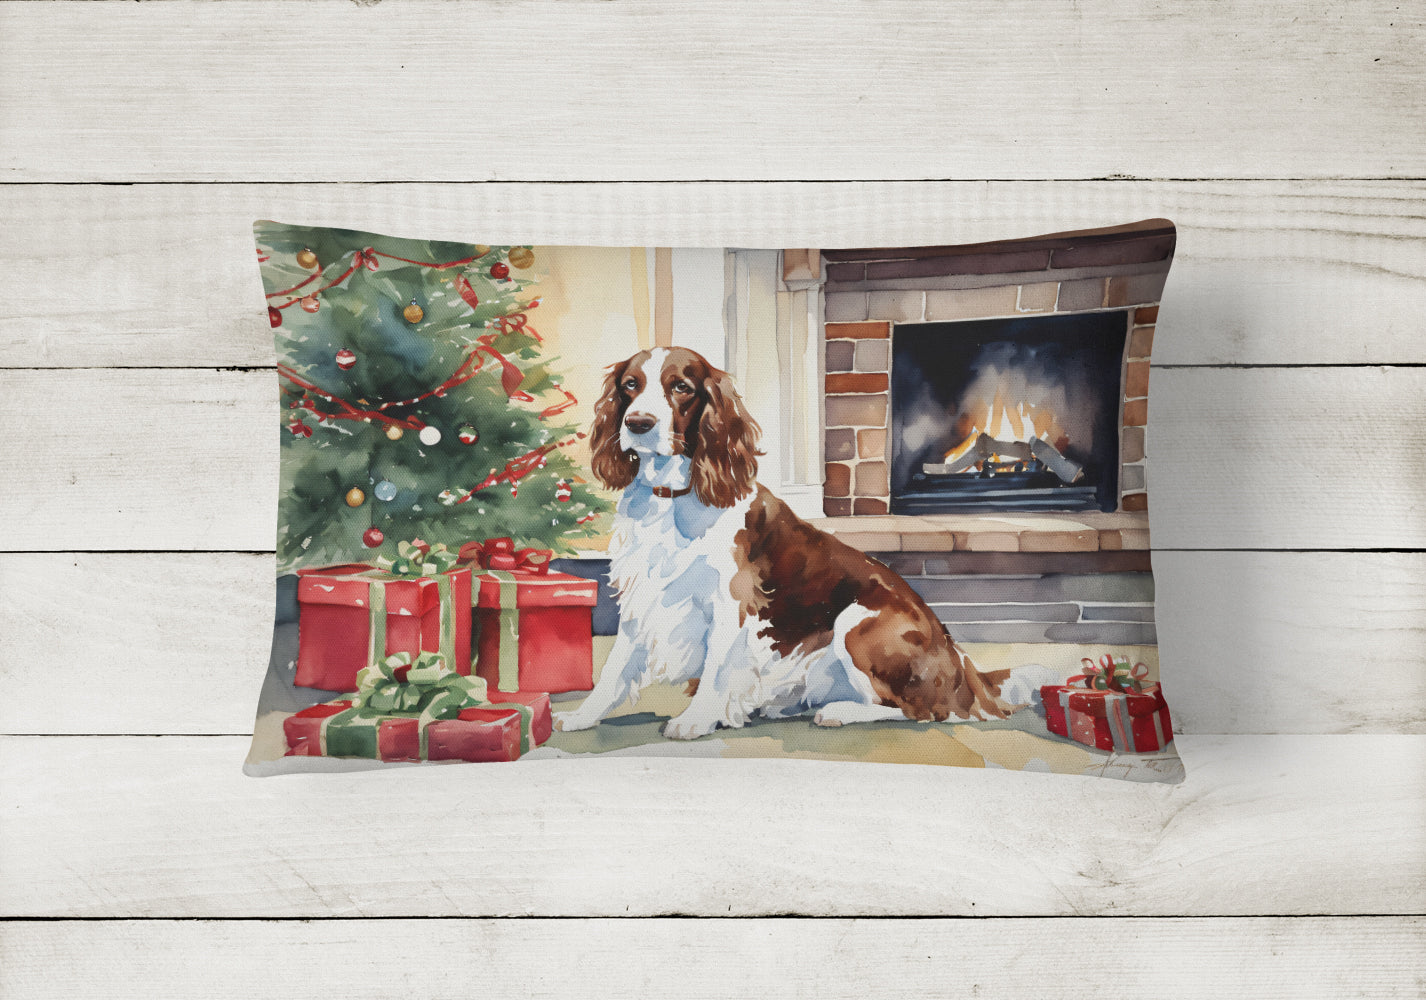 Buy this Welsh Springer Spaniel Cozy Christmas Throw Pillow